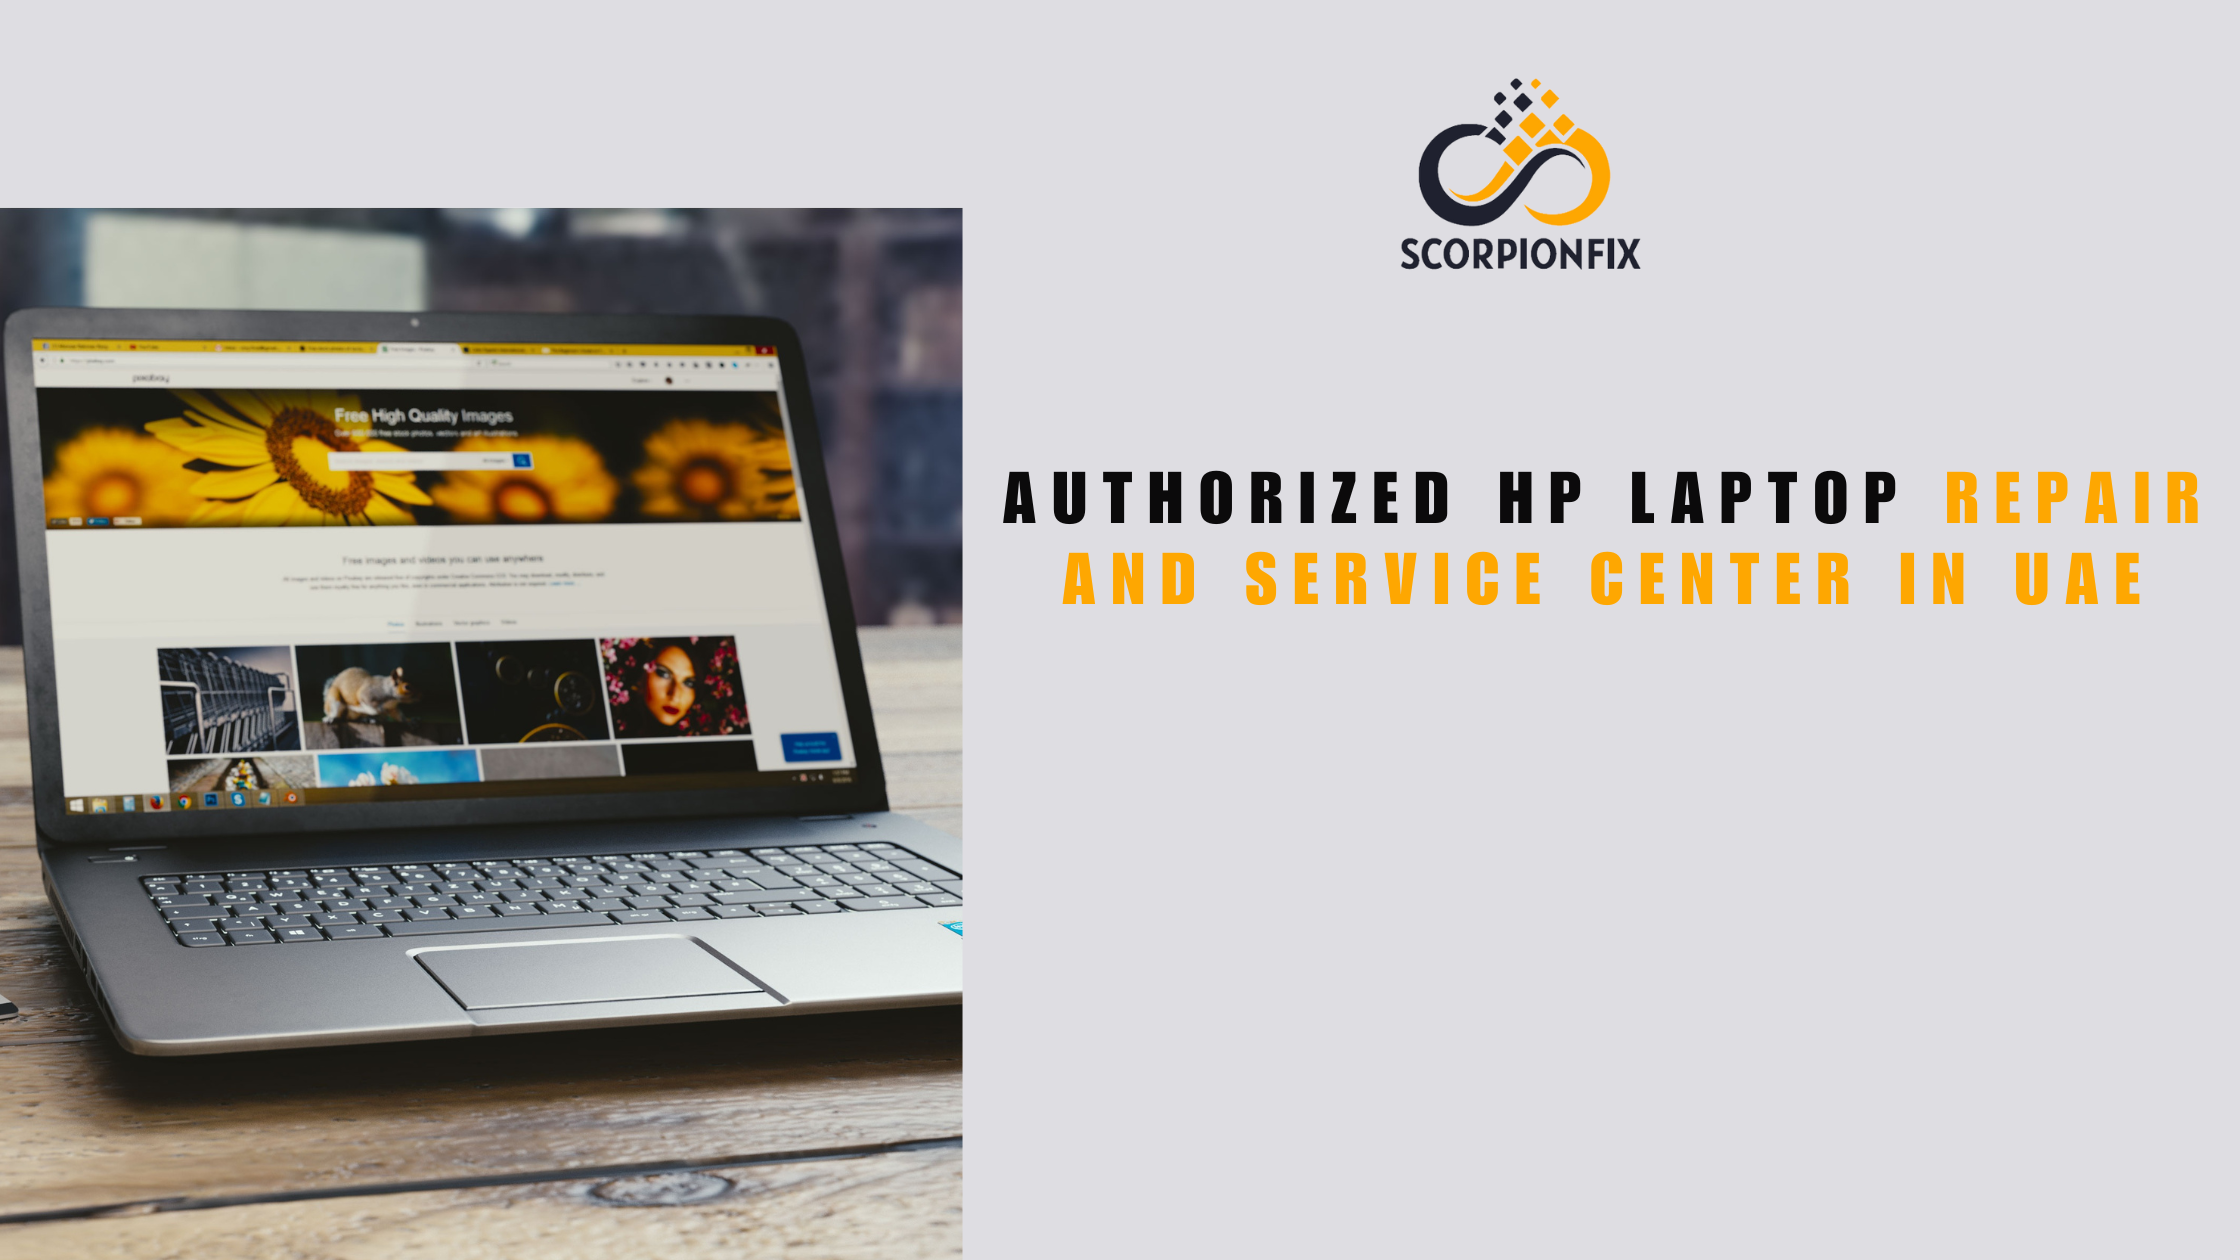 Authorized HP Laptop Repair and Service Center in UAE